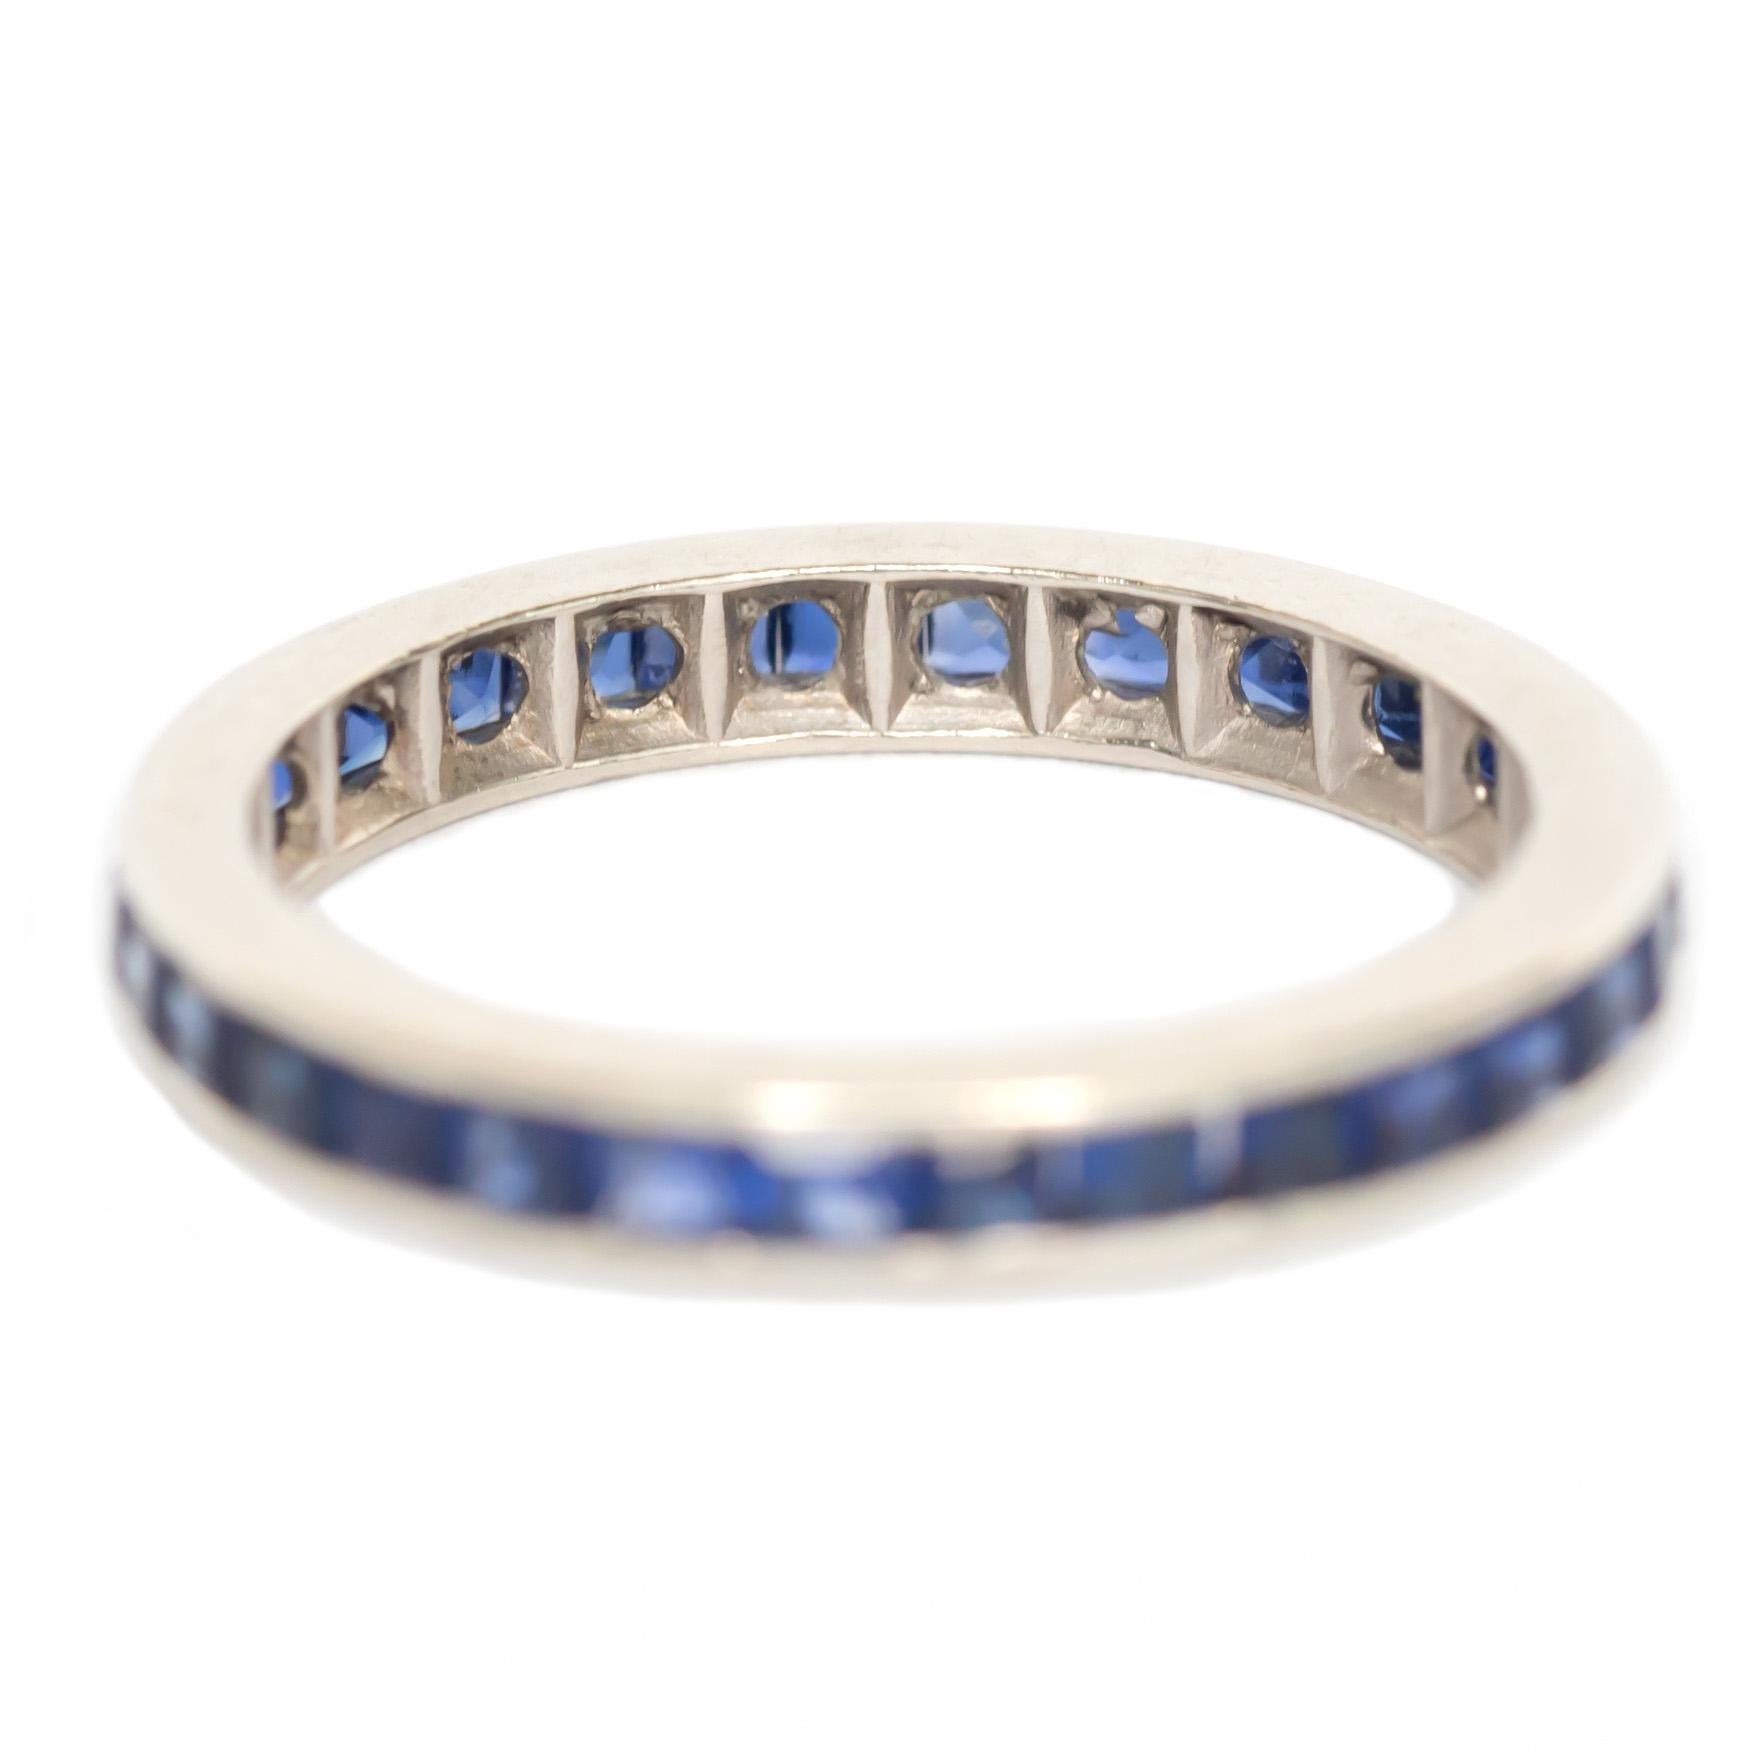 Item Details: 
Ring Size: 4.5
Metal Type: 14 Karat White Gold
Weight: 1.5 grams

Stone Details: 
Type: Sapphire
Shape: Square Step Cut 
Carat Weight: 1.00 carat, total weight.
Color: Natural Royal Blue 


Finger to Top of Stone Measurement: